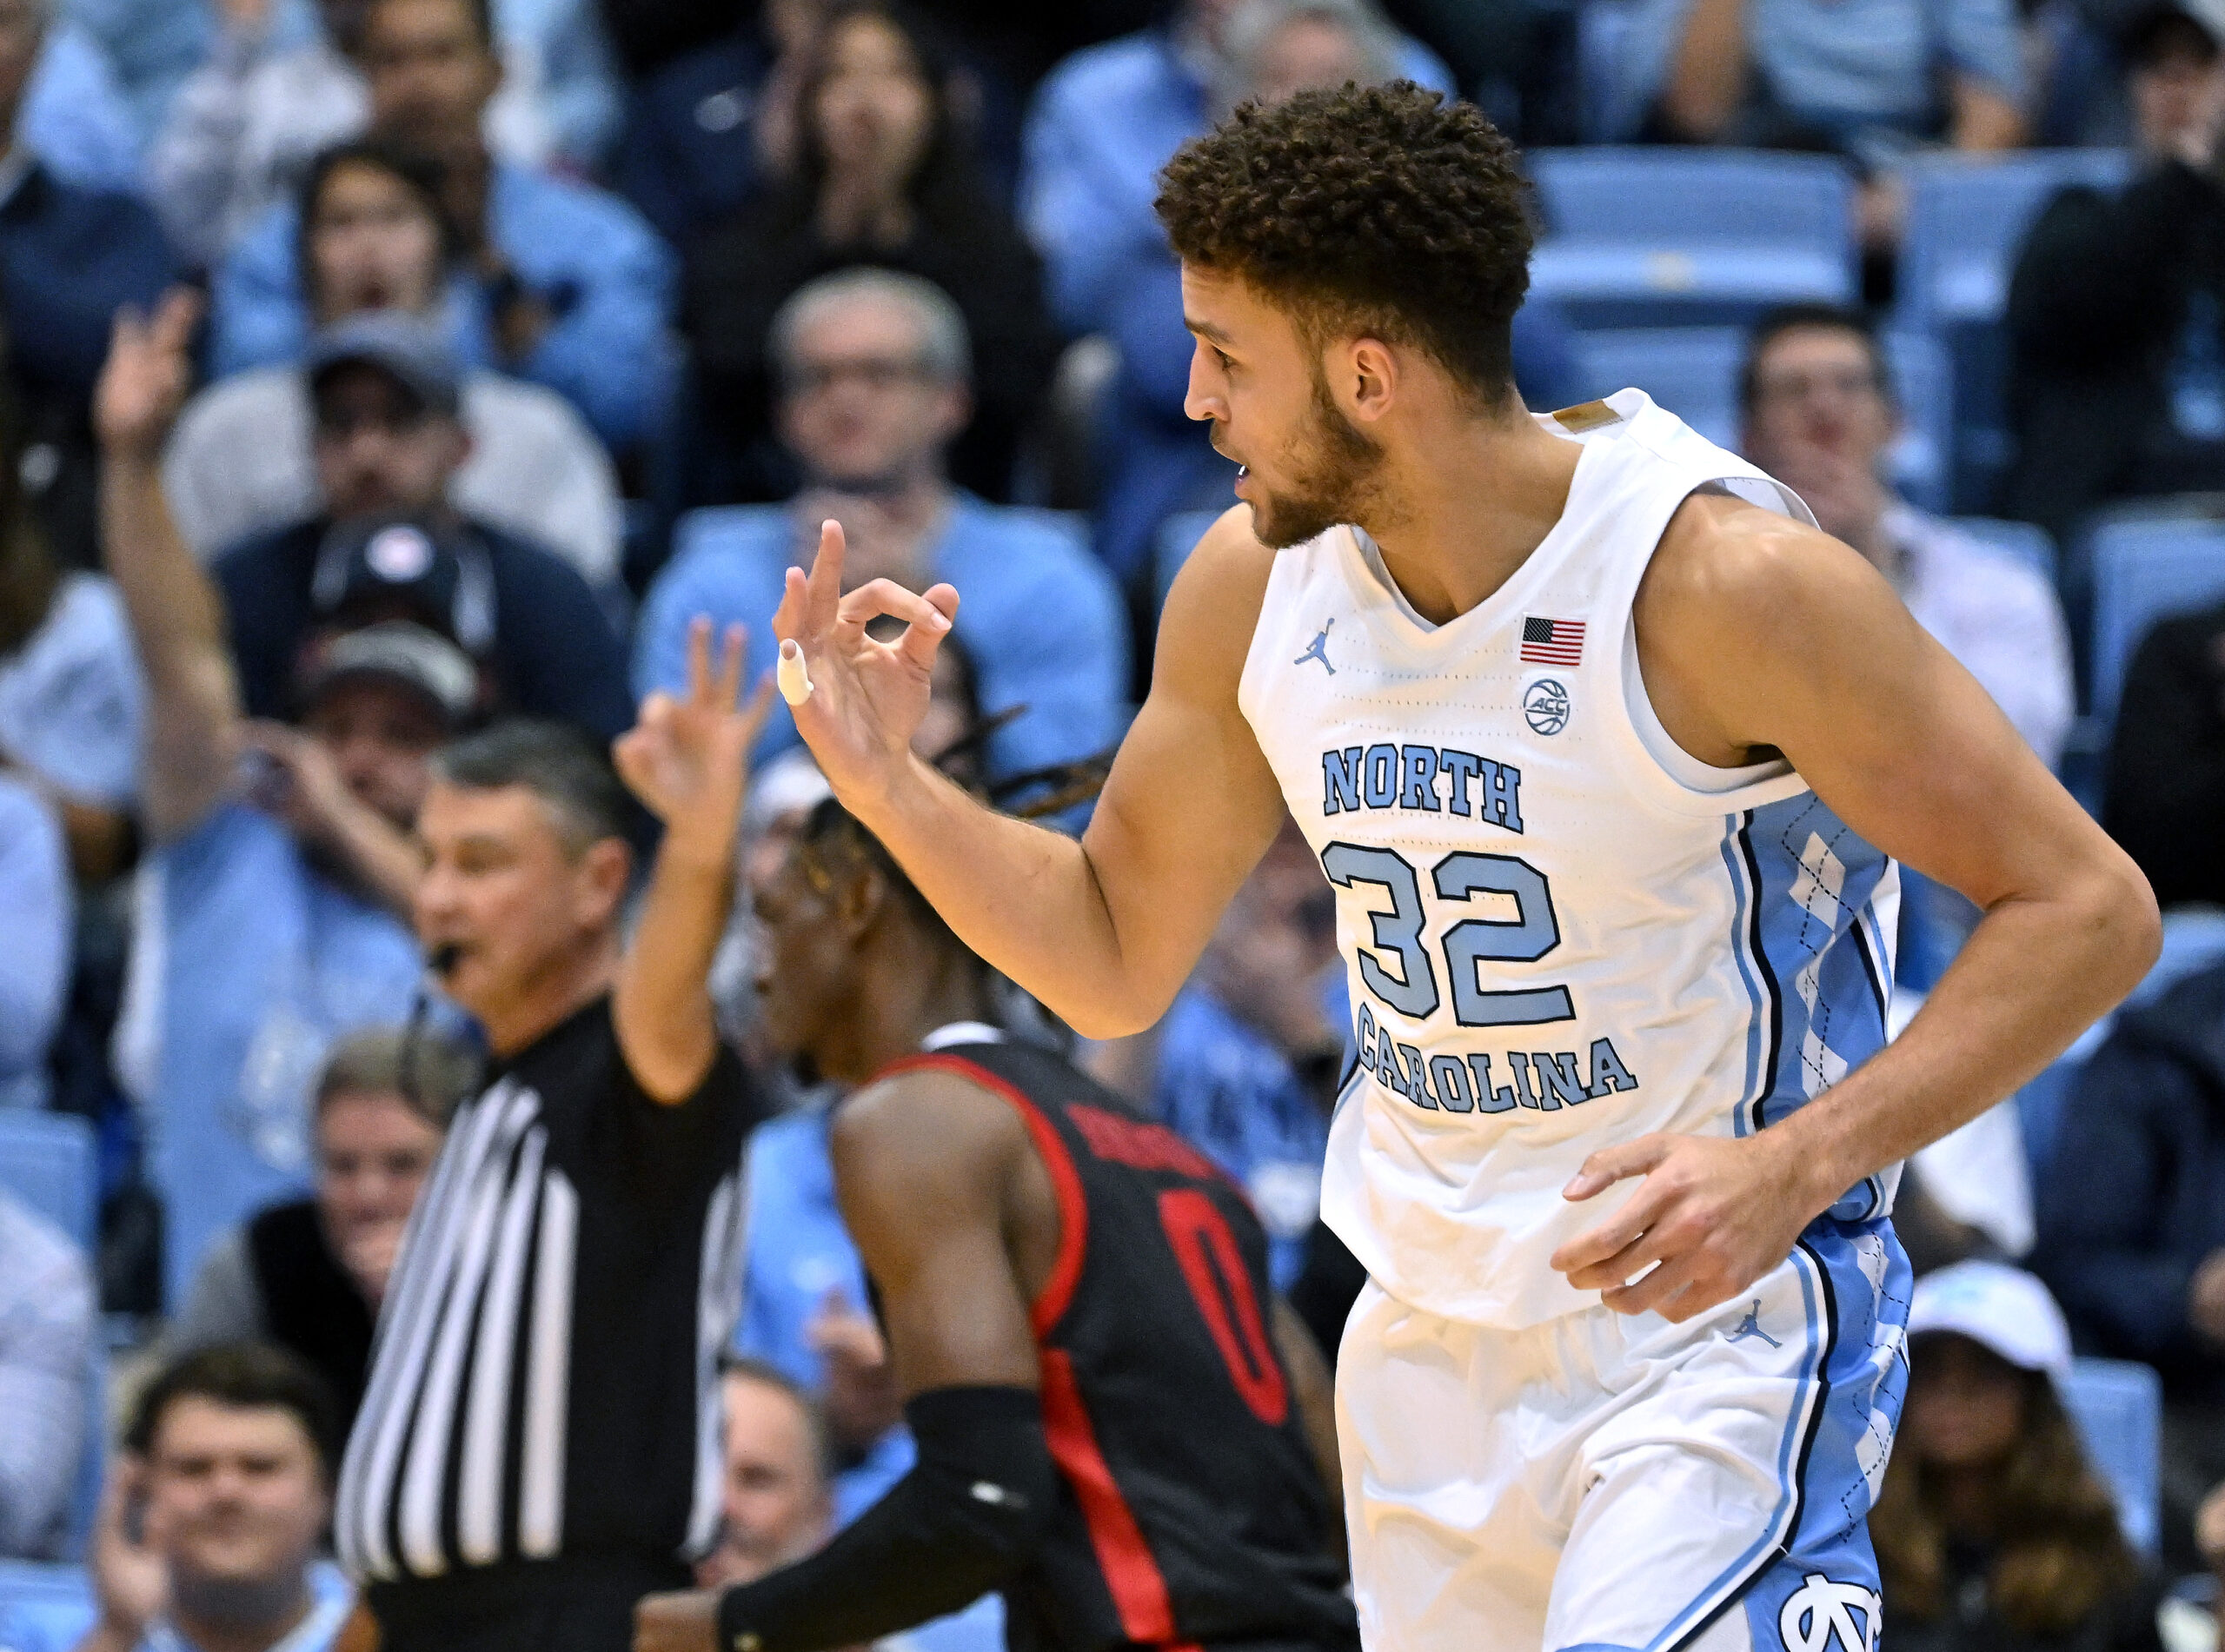 North Carolina survives against Gardner-Webb to stay perfect